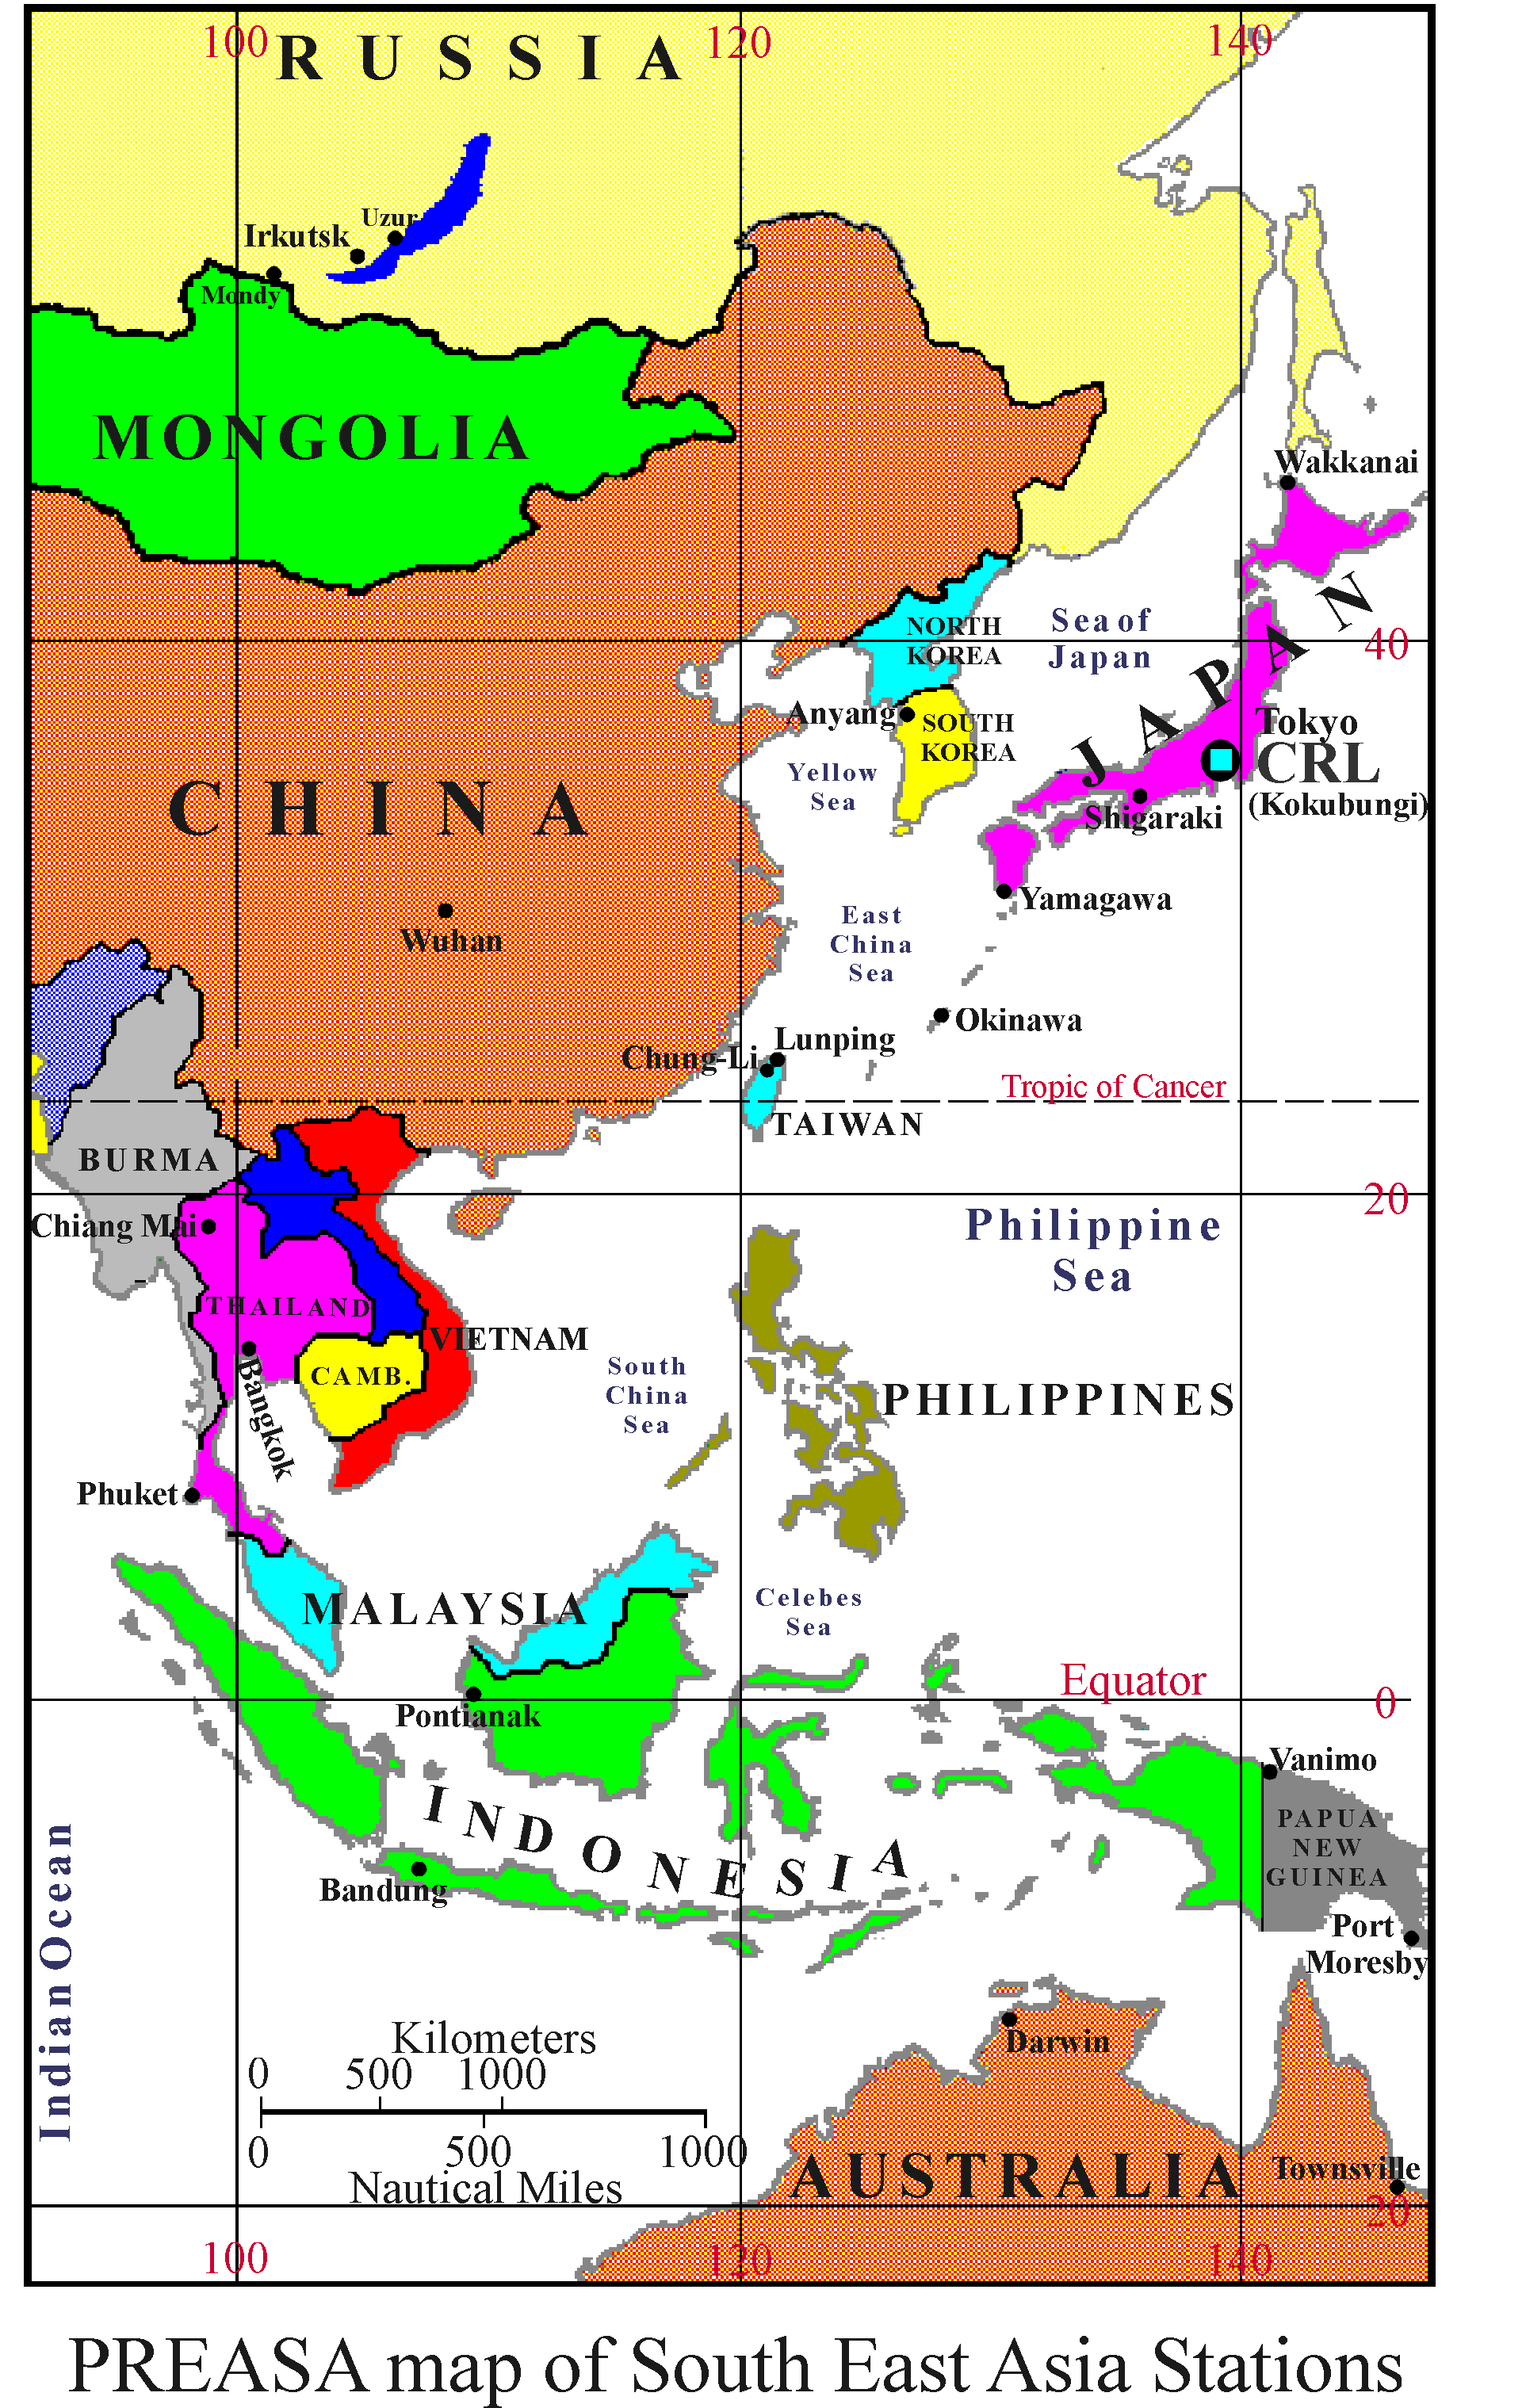 The Lines Drew On The Physical Maps In Southeast Asia 58